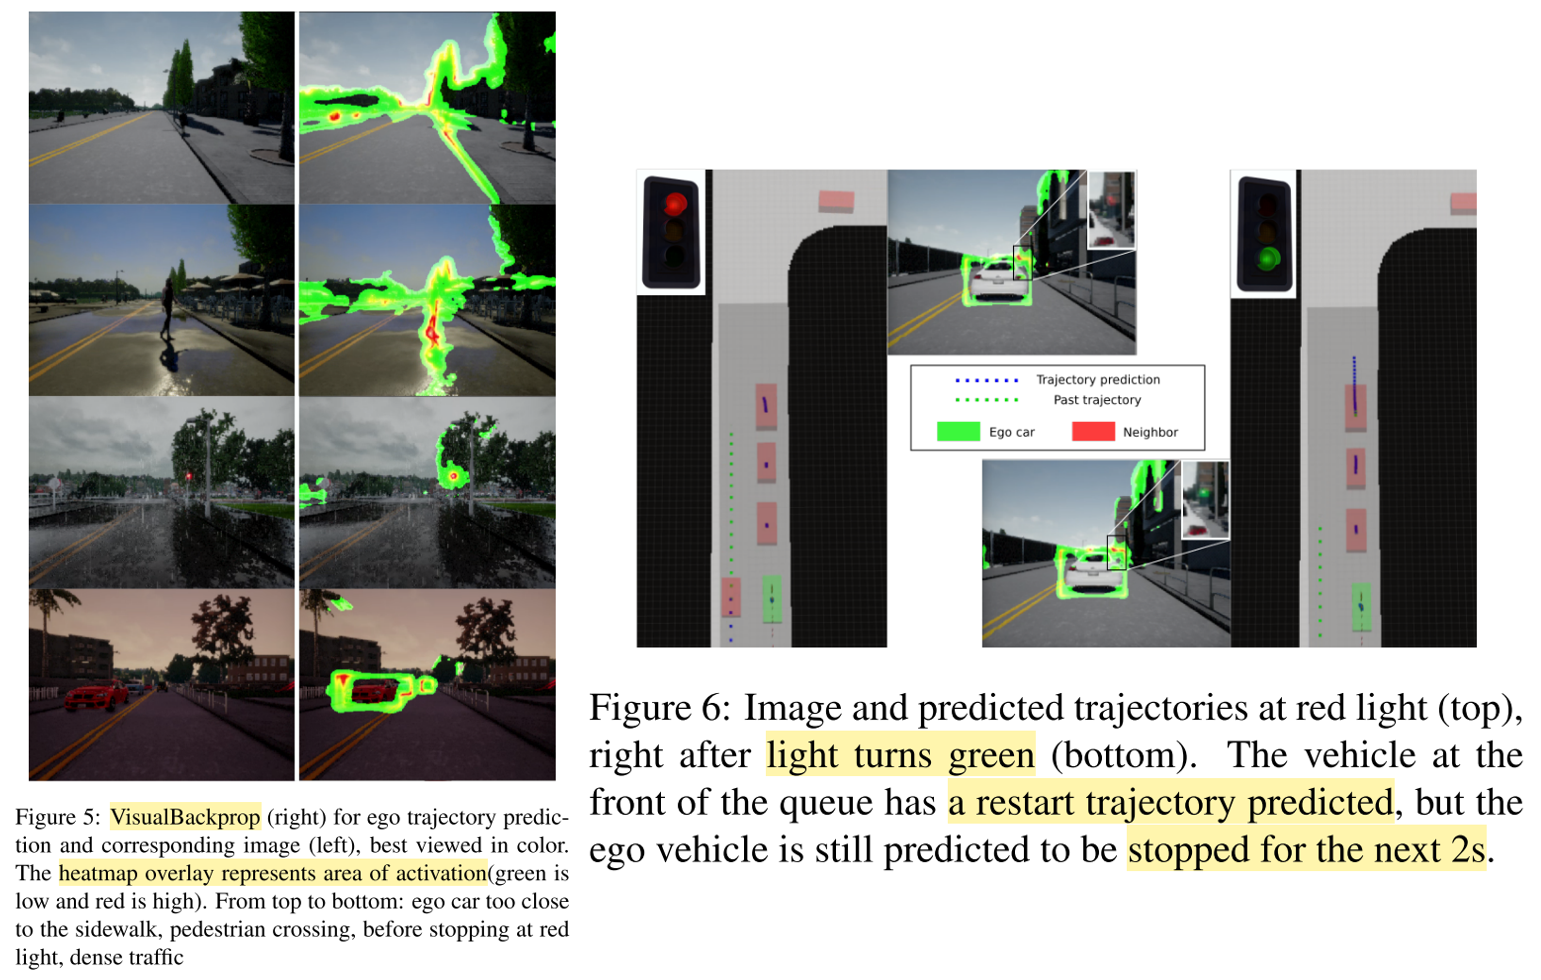 VisualBackProp highlights the image pixels which contributed the most to the final results - Traffic lights and their colours are important, together with highlights lane markings and curbs when there is a significant lateral deviation. Source.